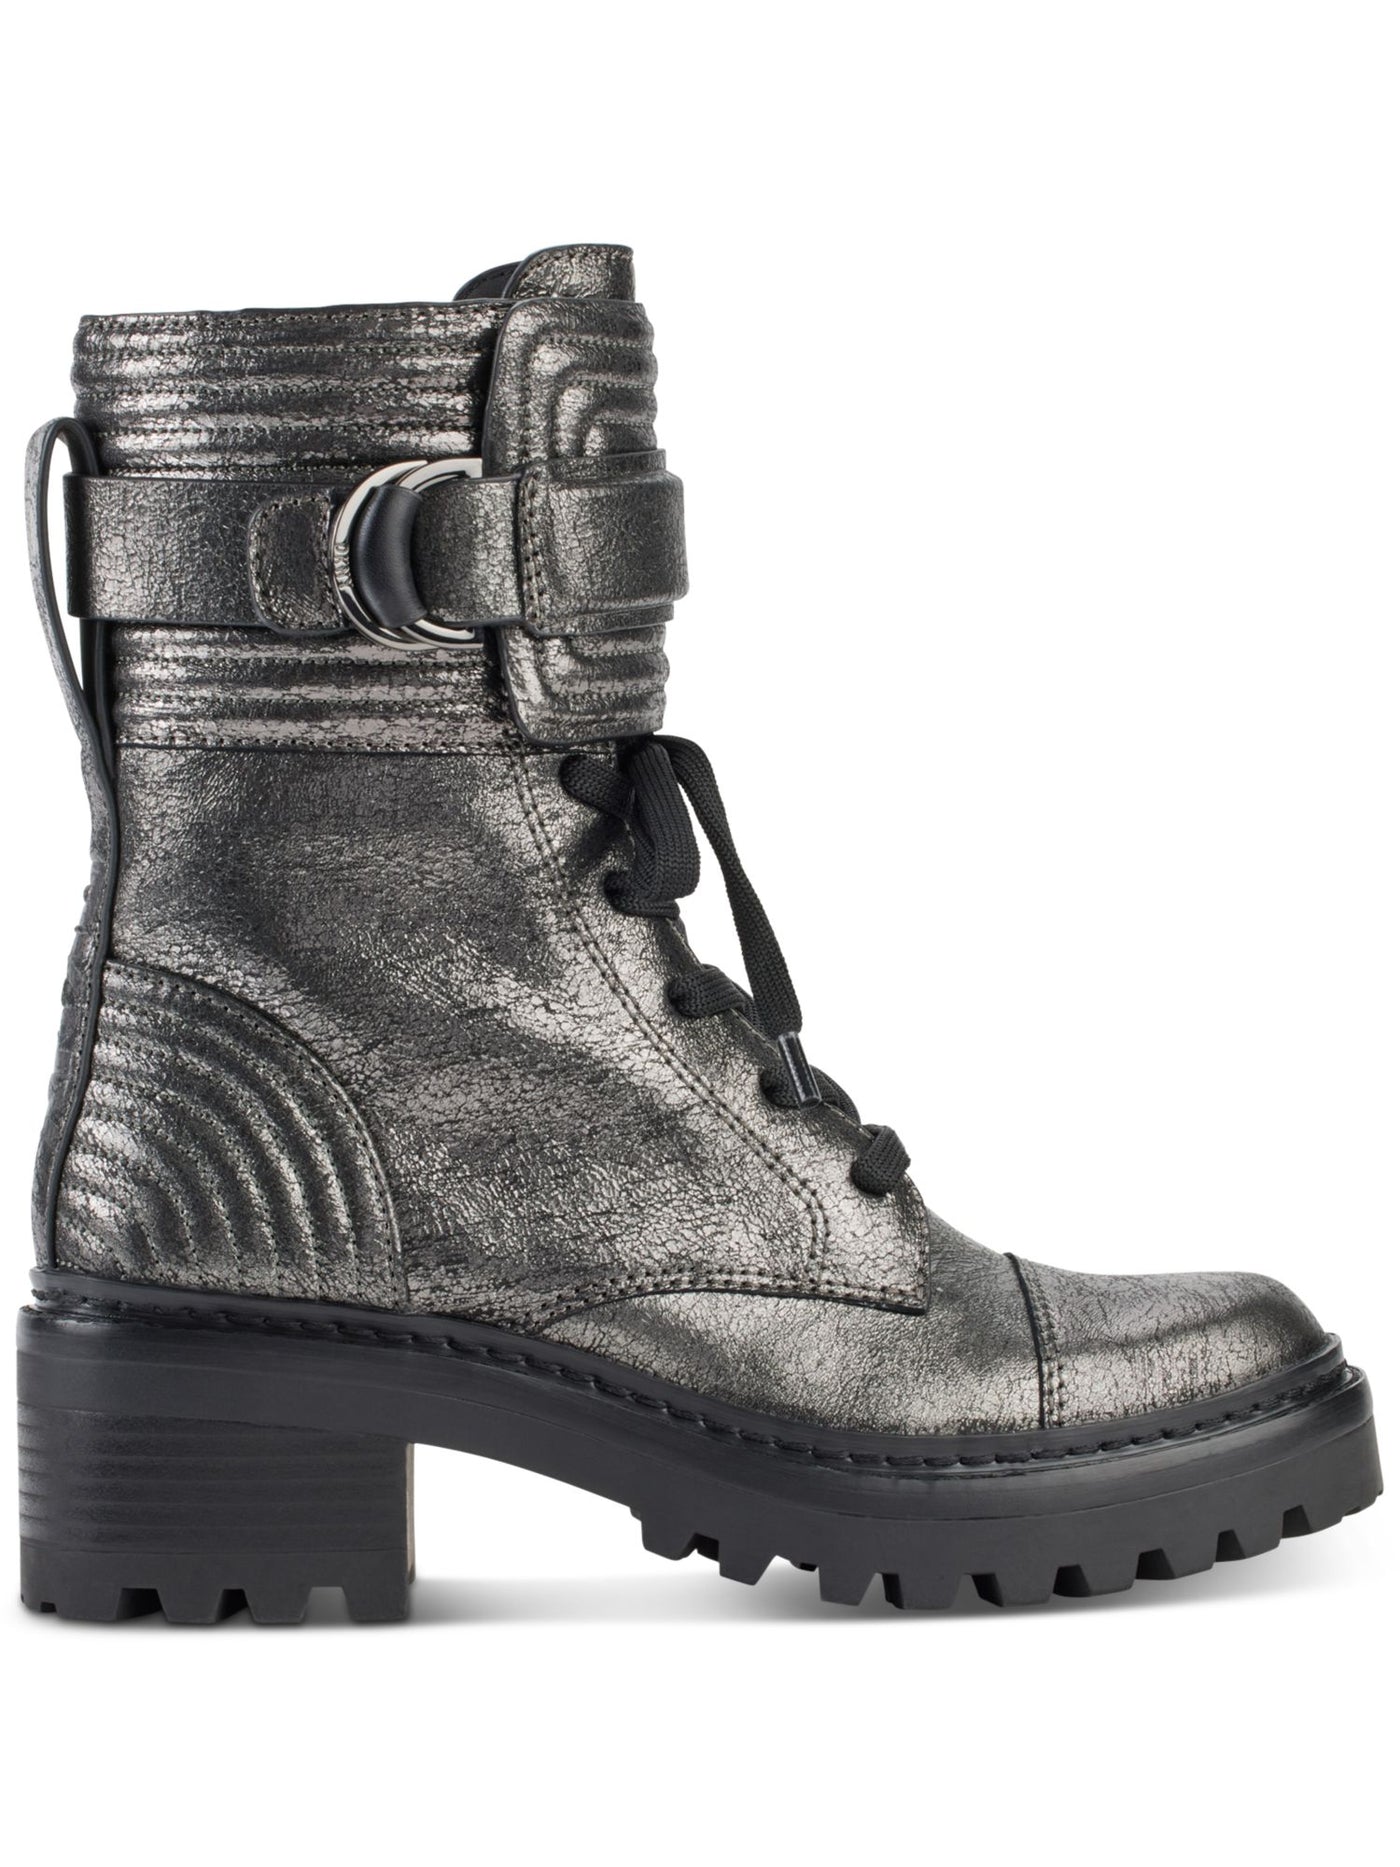 DKNY Womens Silver Buckle Accent Metallic Basia Round Toe Block Heel Zip-Up Leather Combat Boots 11 M